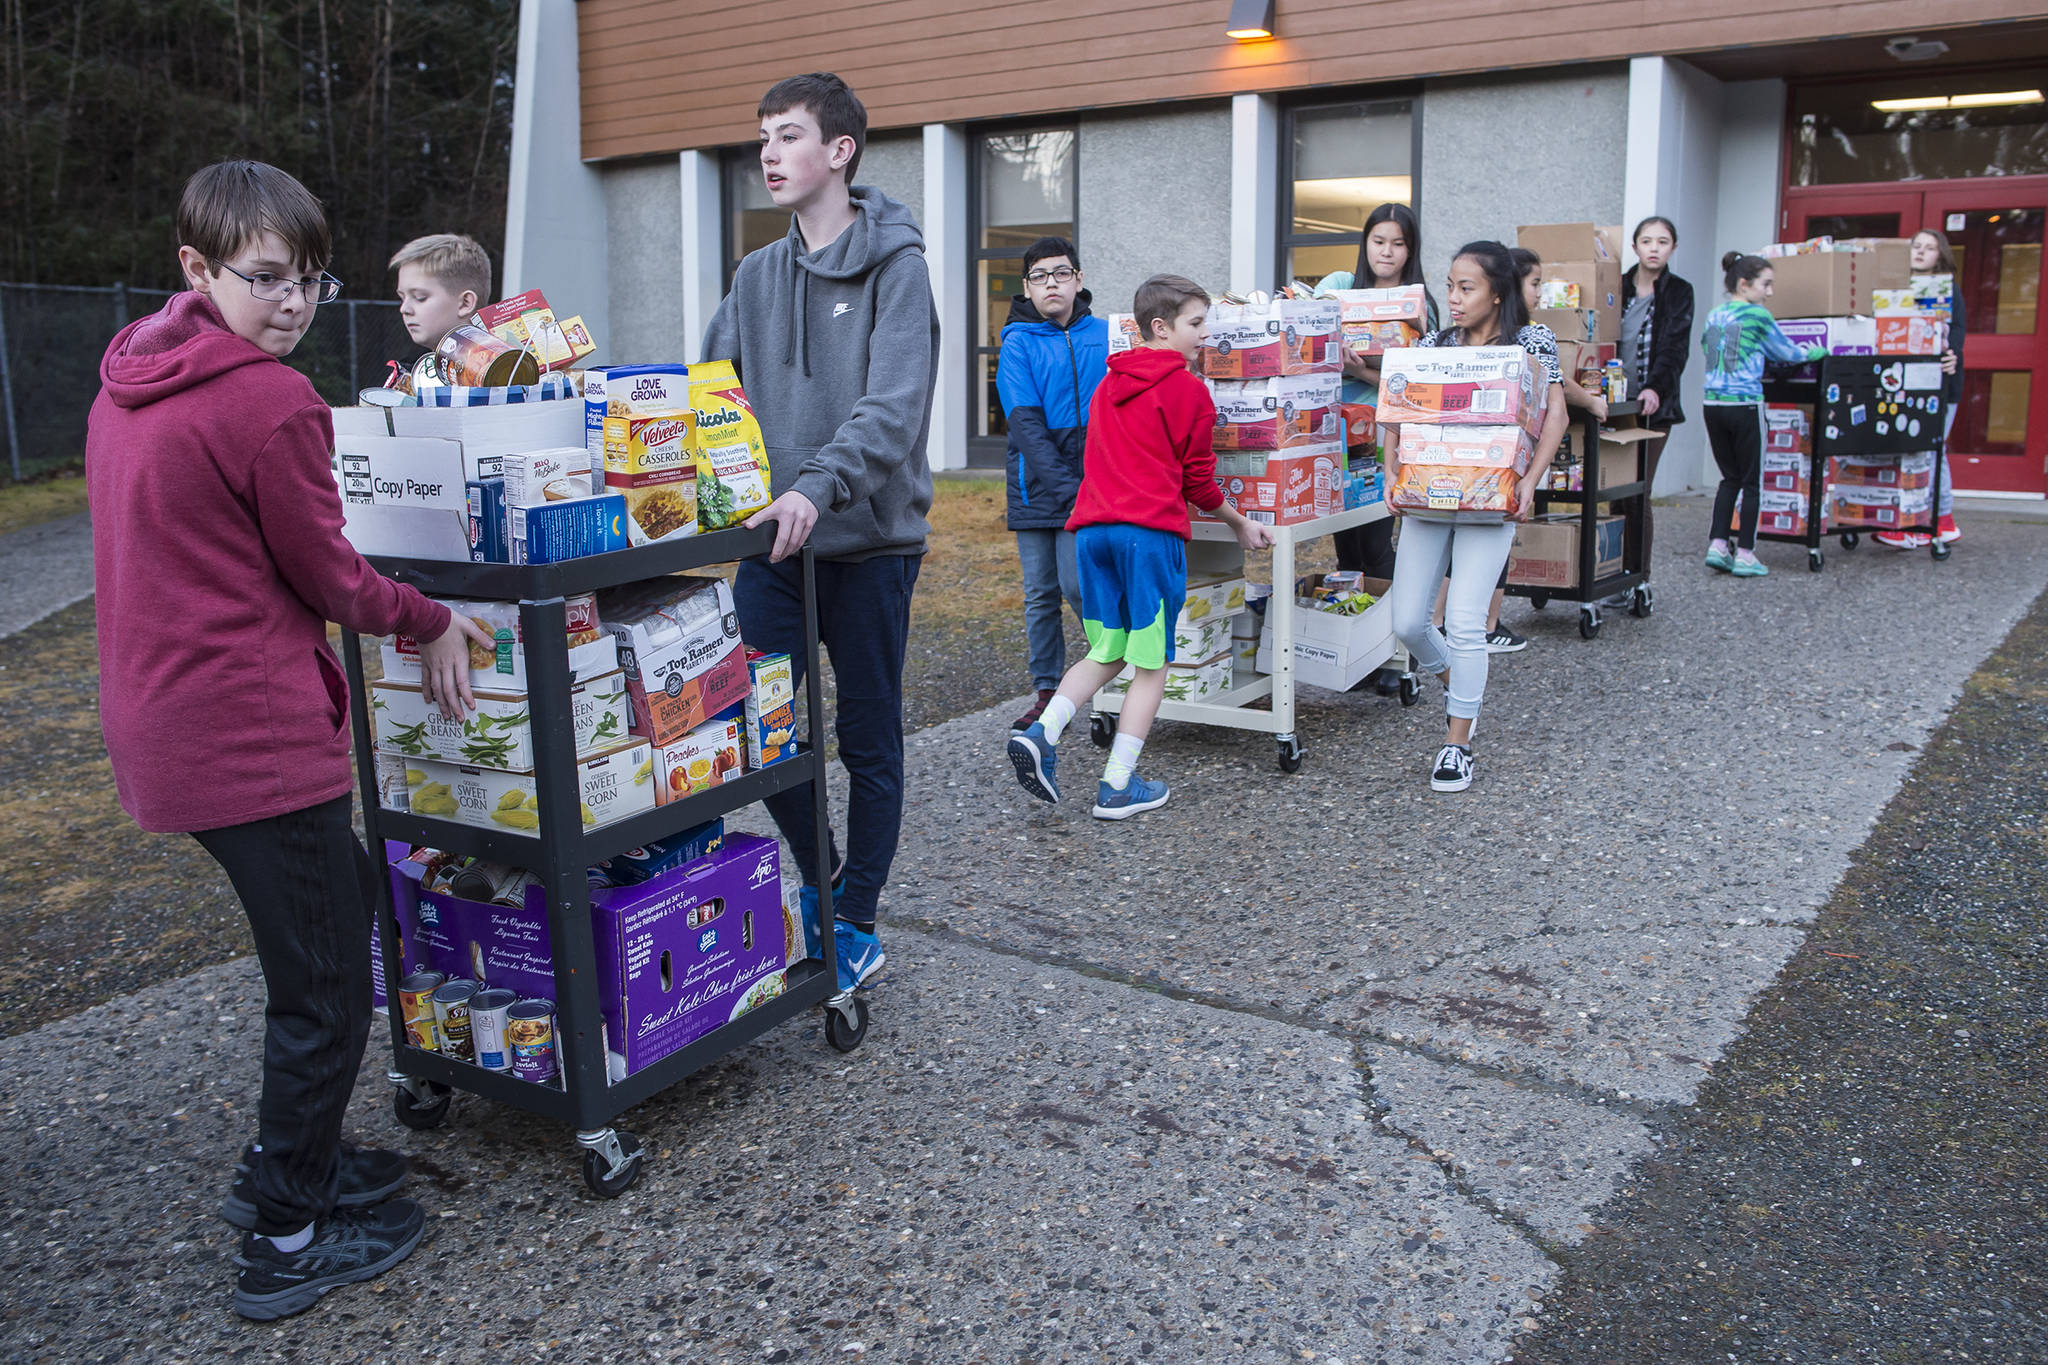 Lead by Student Body President eighth grader Grant Pierson, left, Floyd Dryden Middle School students uses carts to move donated food to a waiting Southeast Alaska Foodbank van on Tuesday, Nov. 20, 2018. (Michael Penn | Juneau Empire)